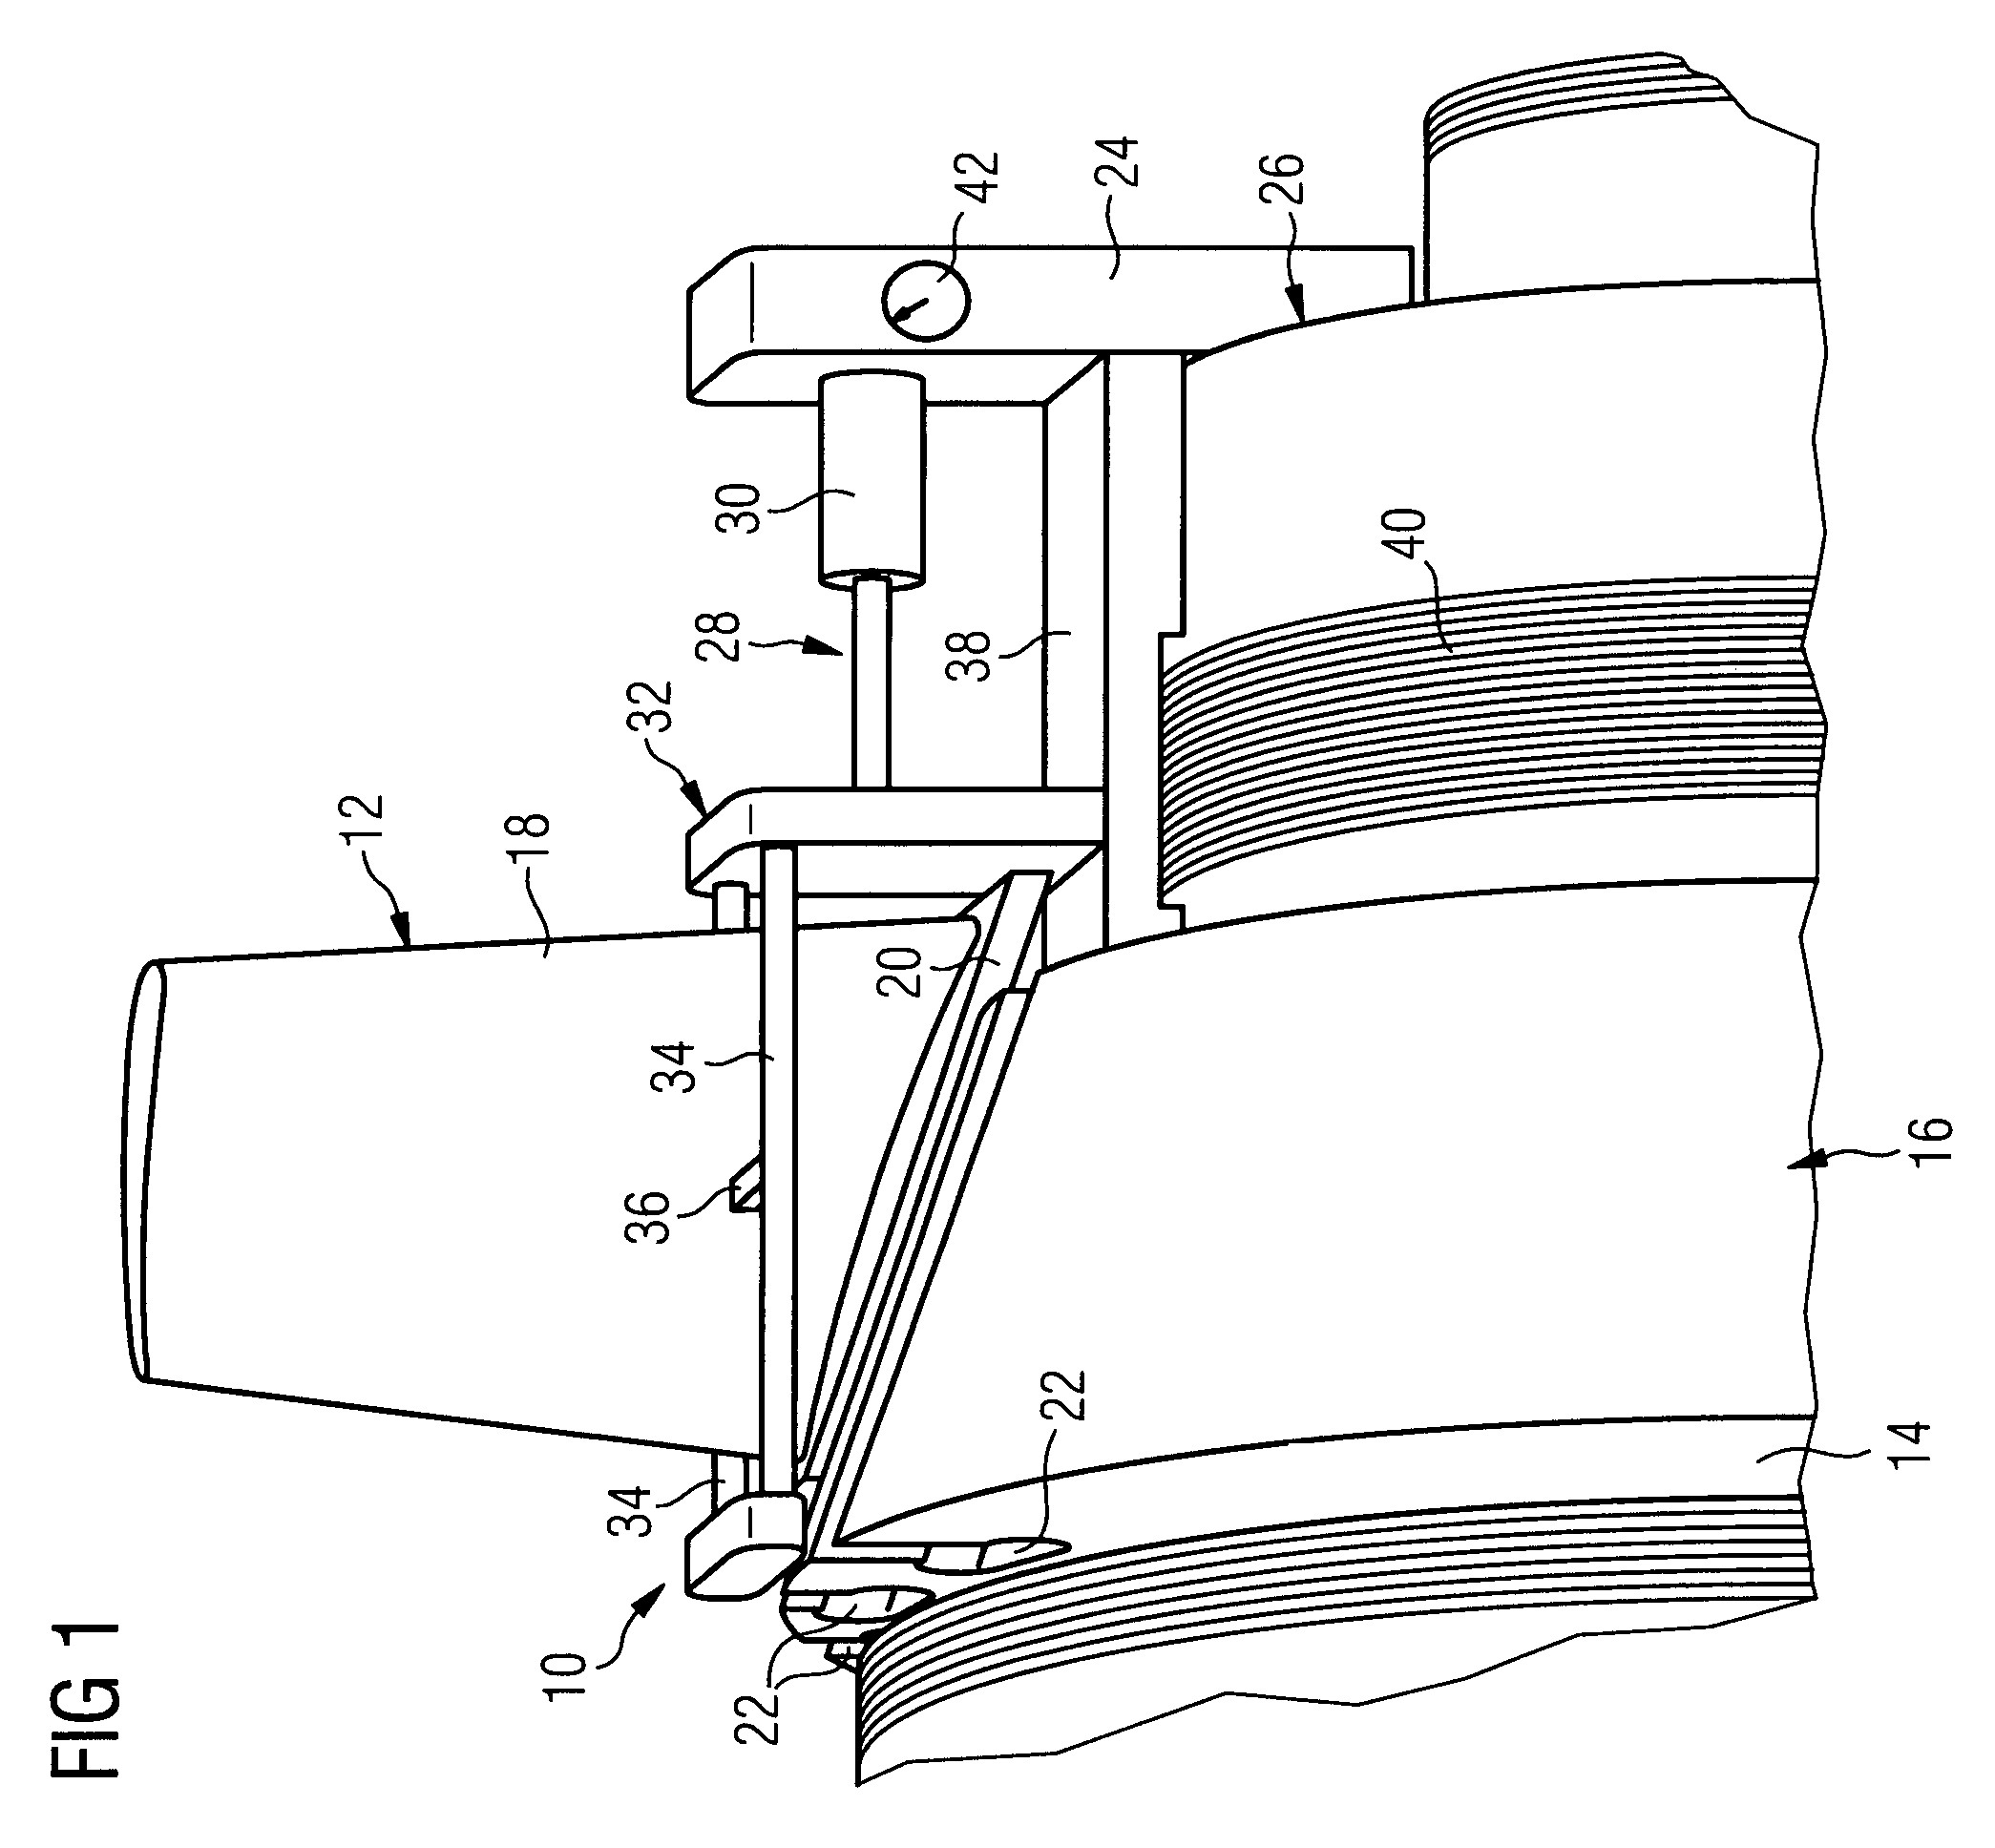 Device for the demounting of blades of a turbine or of a compressor